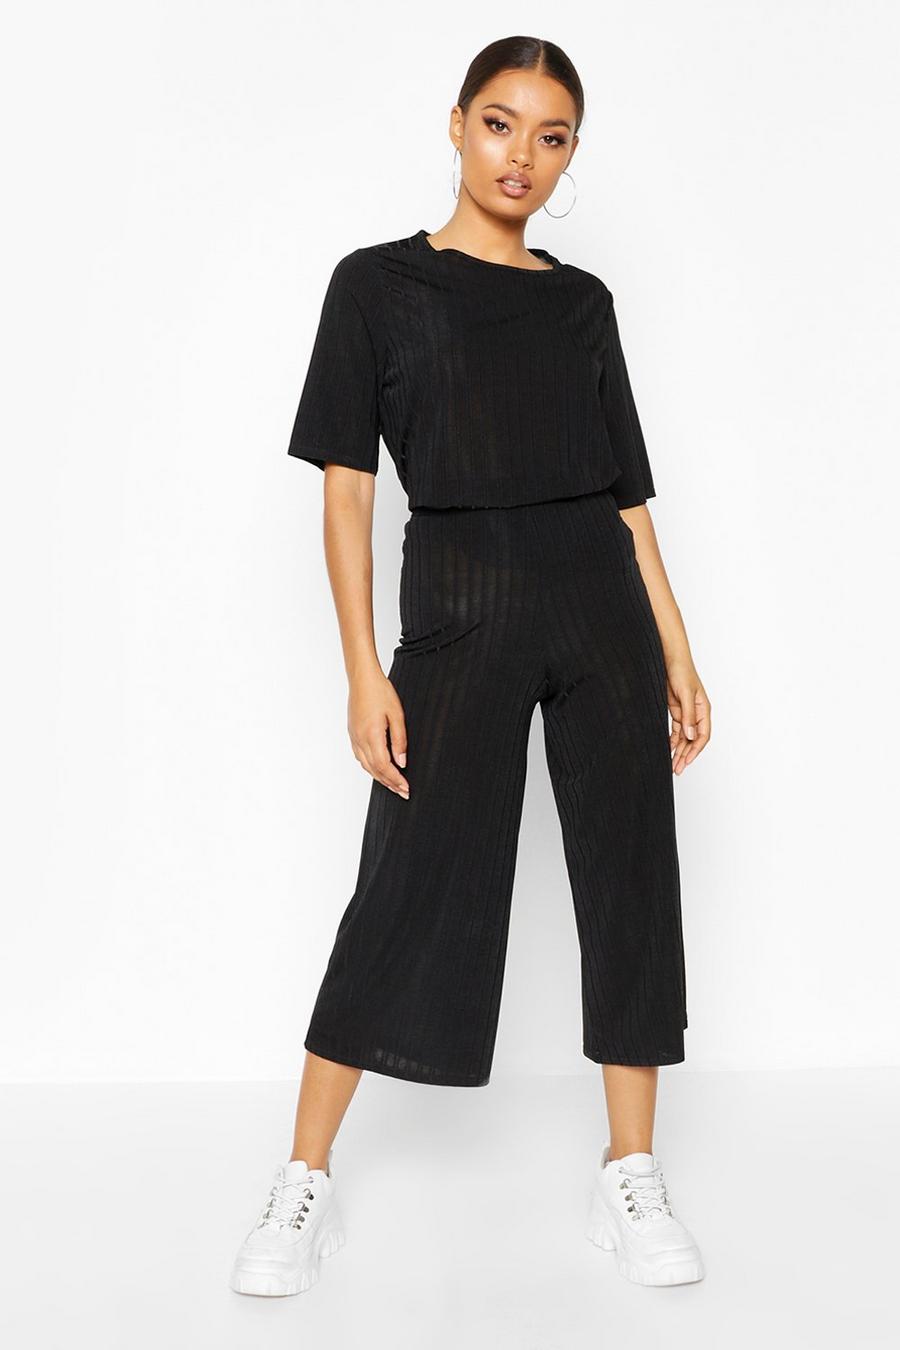 Slinkly Rib T Shirt And Culotte Two-Piece Set image number 1